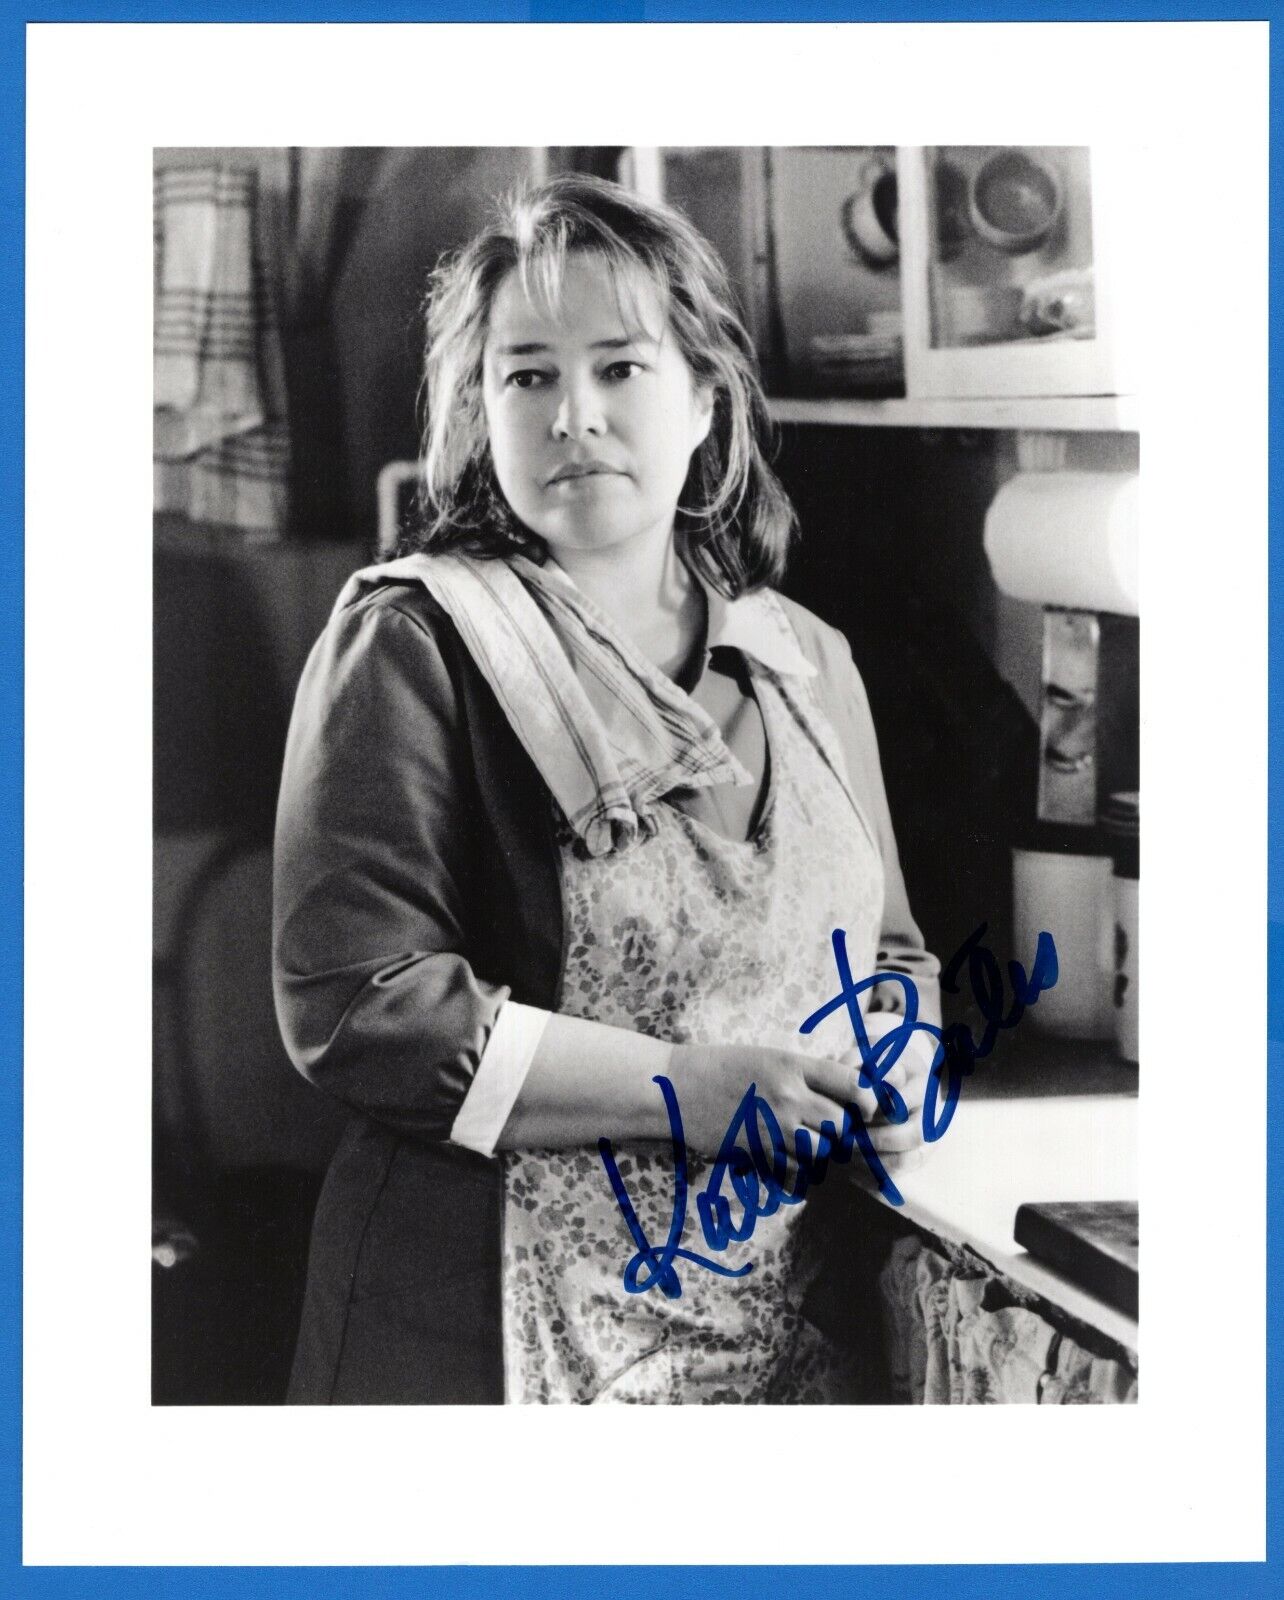 Kathy Bates Actress Hand Signed Autograph 8x10 Photo Poster painting